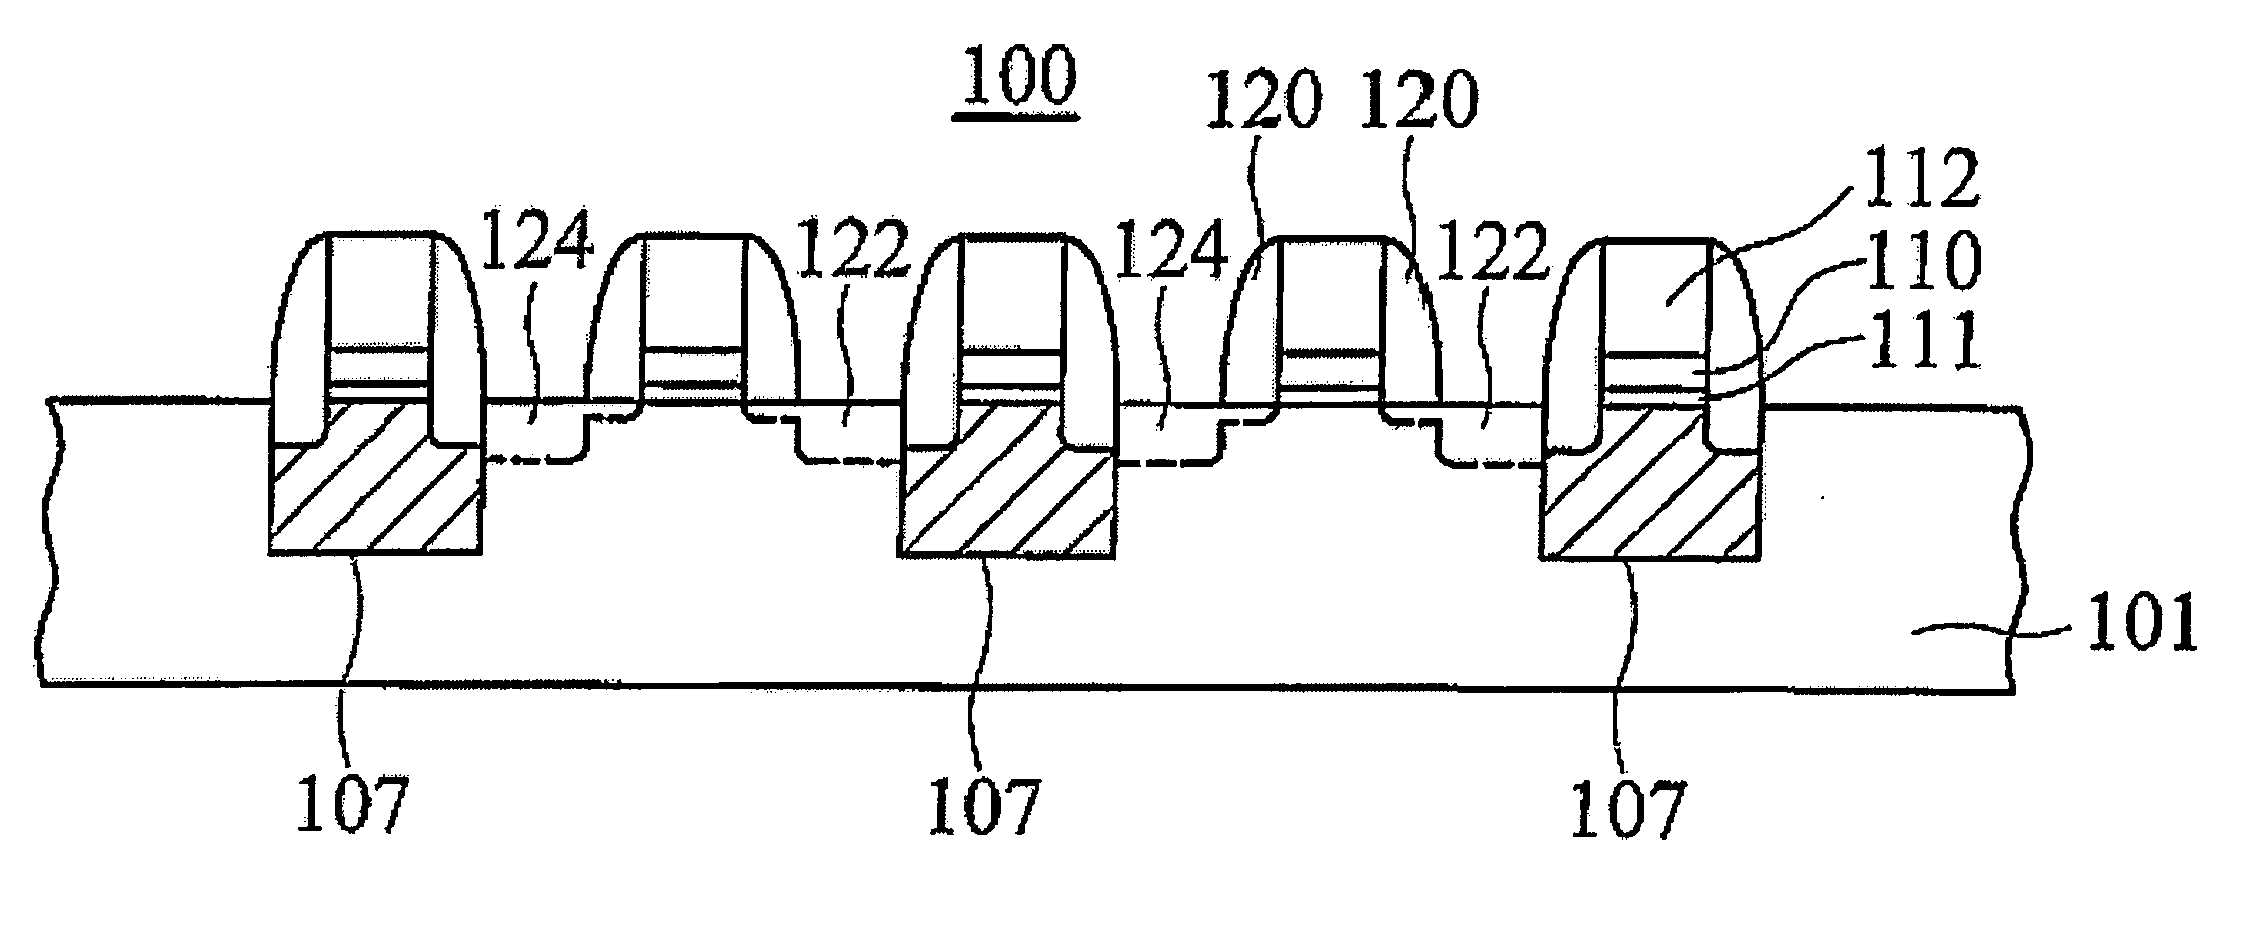 Semiconductor device with high-k gate dielectric and quasi-metal gate, and method of forming thereof